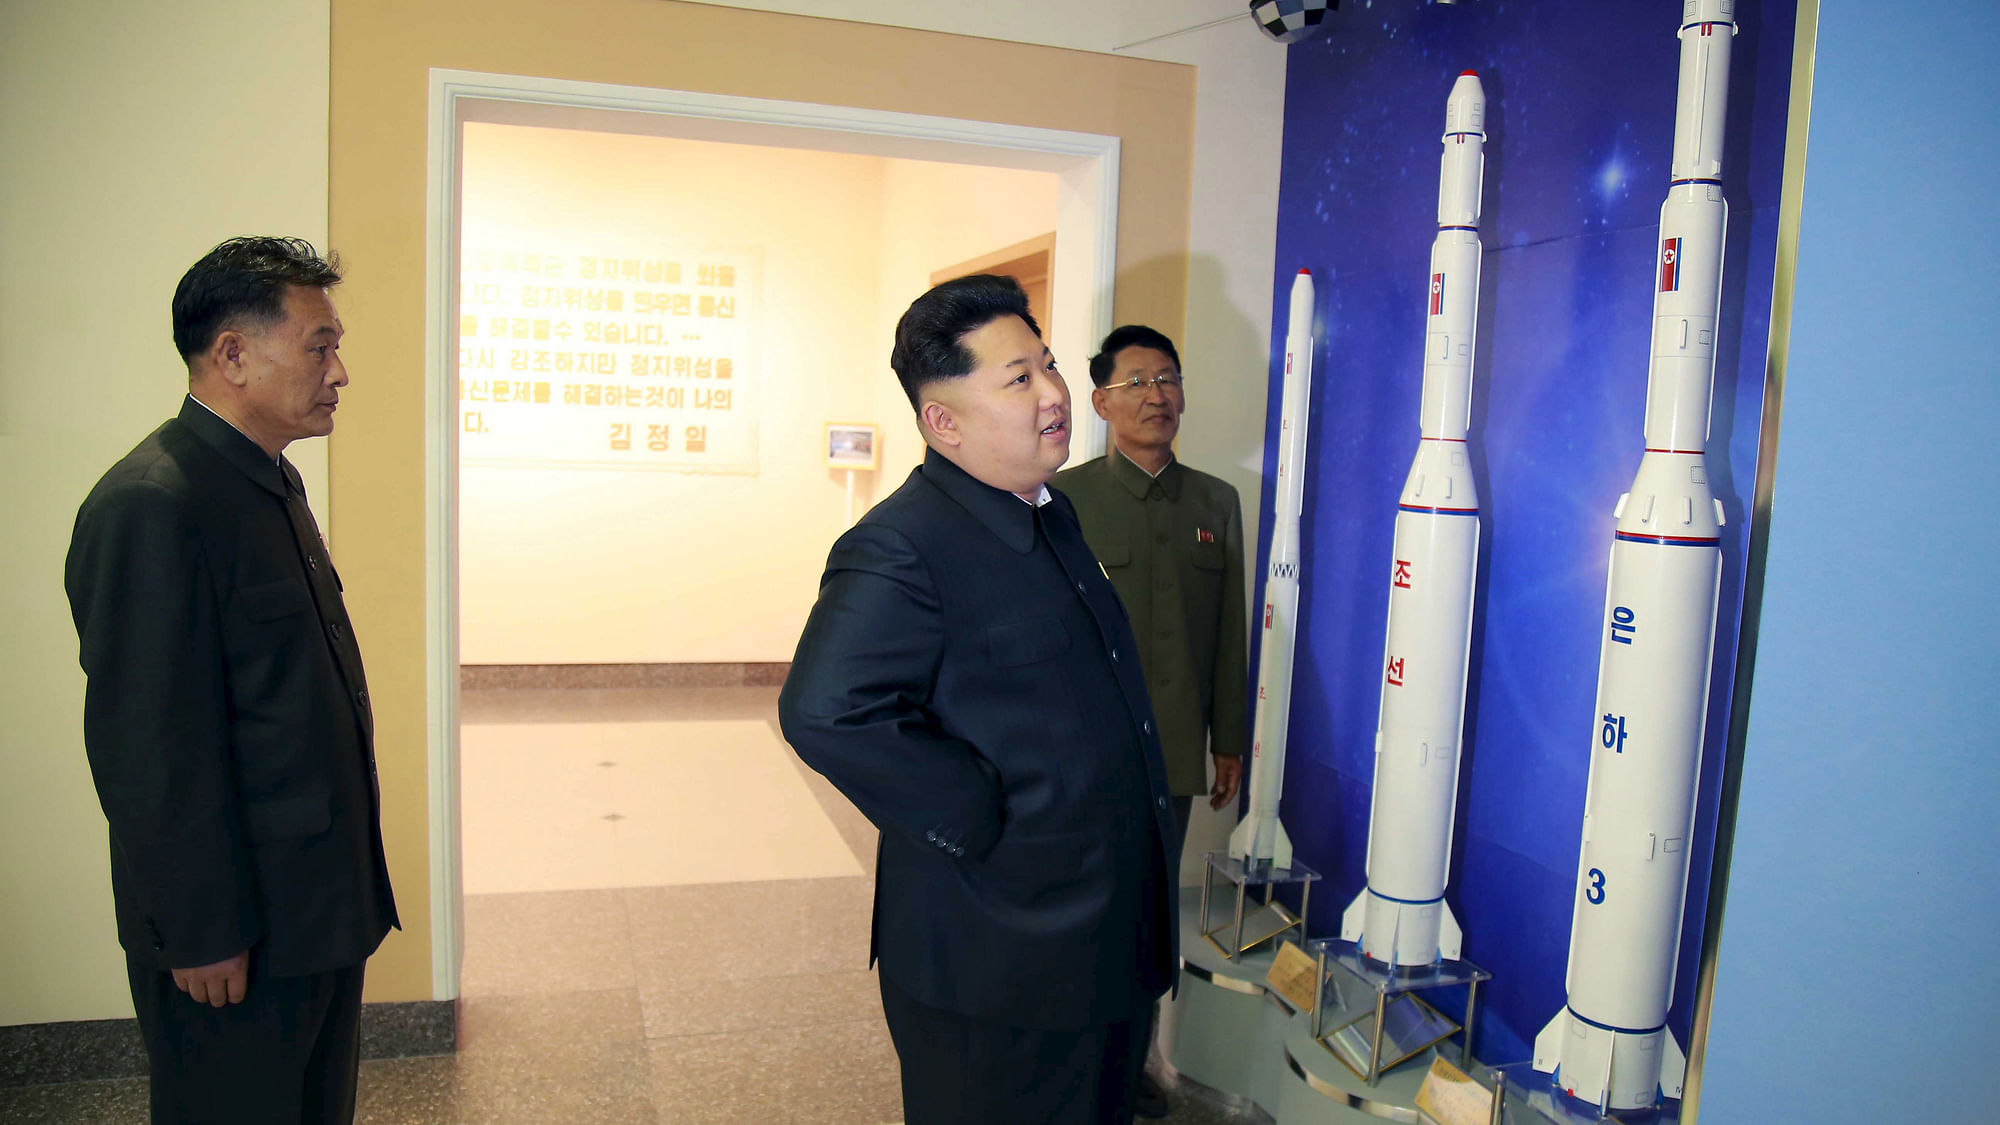 North Korean leader, Kim Jong Un, supervised the exercise that successfully tested the simulated detonation of nuclear warheads. (Photo: Reuters)